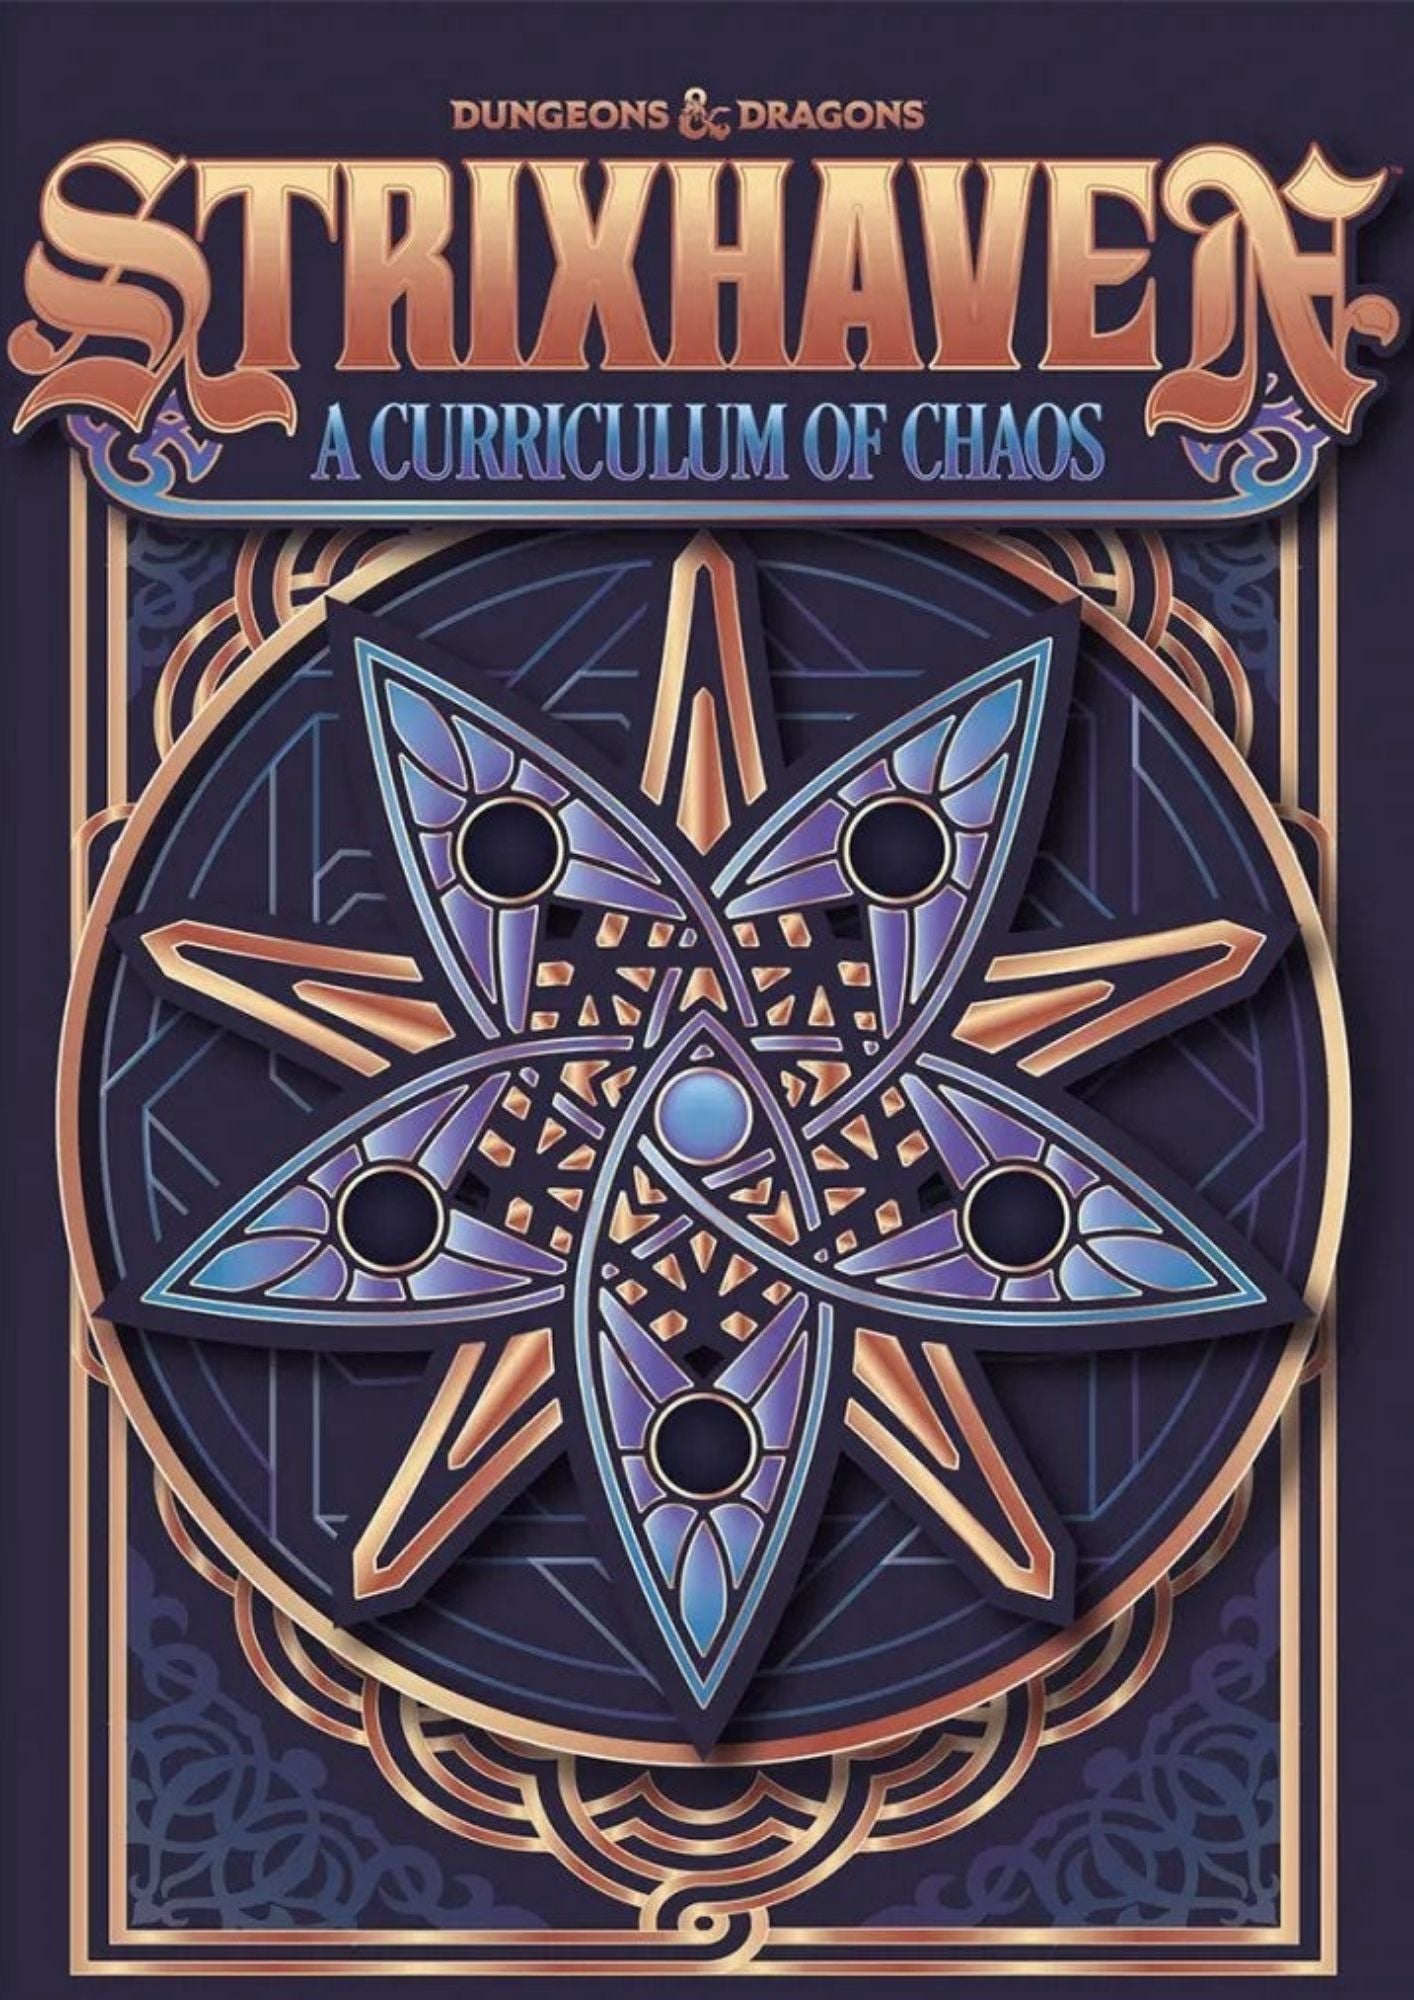 (Alt) Strixhaven: A Curriculum of Chaos - Dungeons & Dragons (DnD) 5e Limited Edition